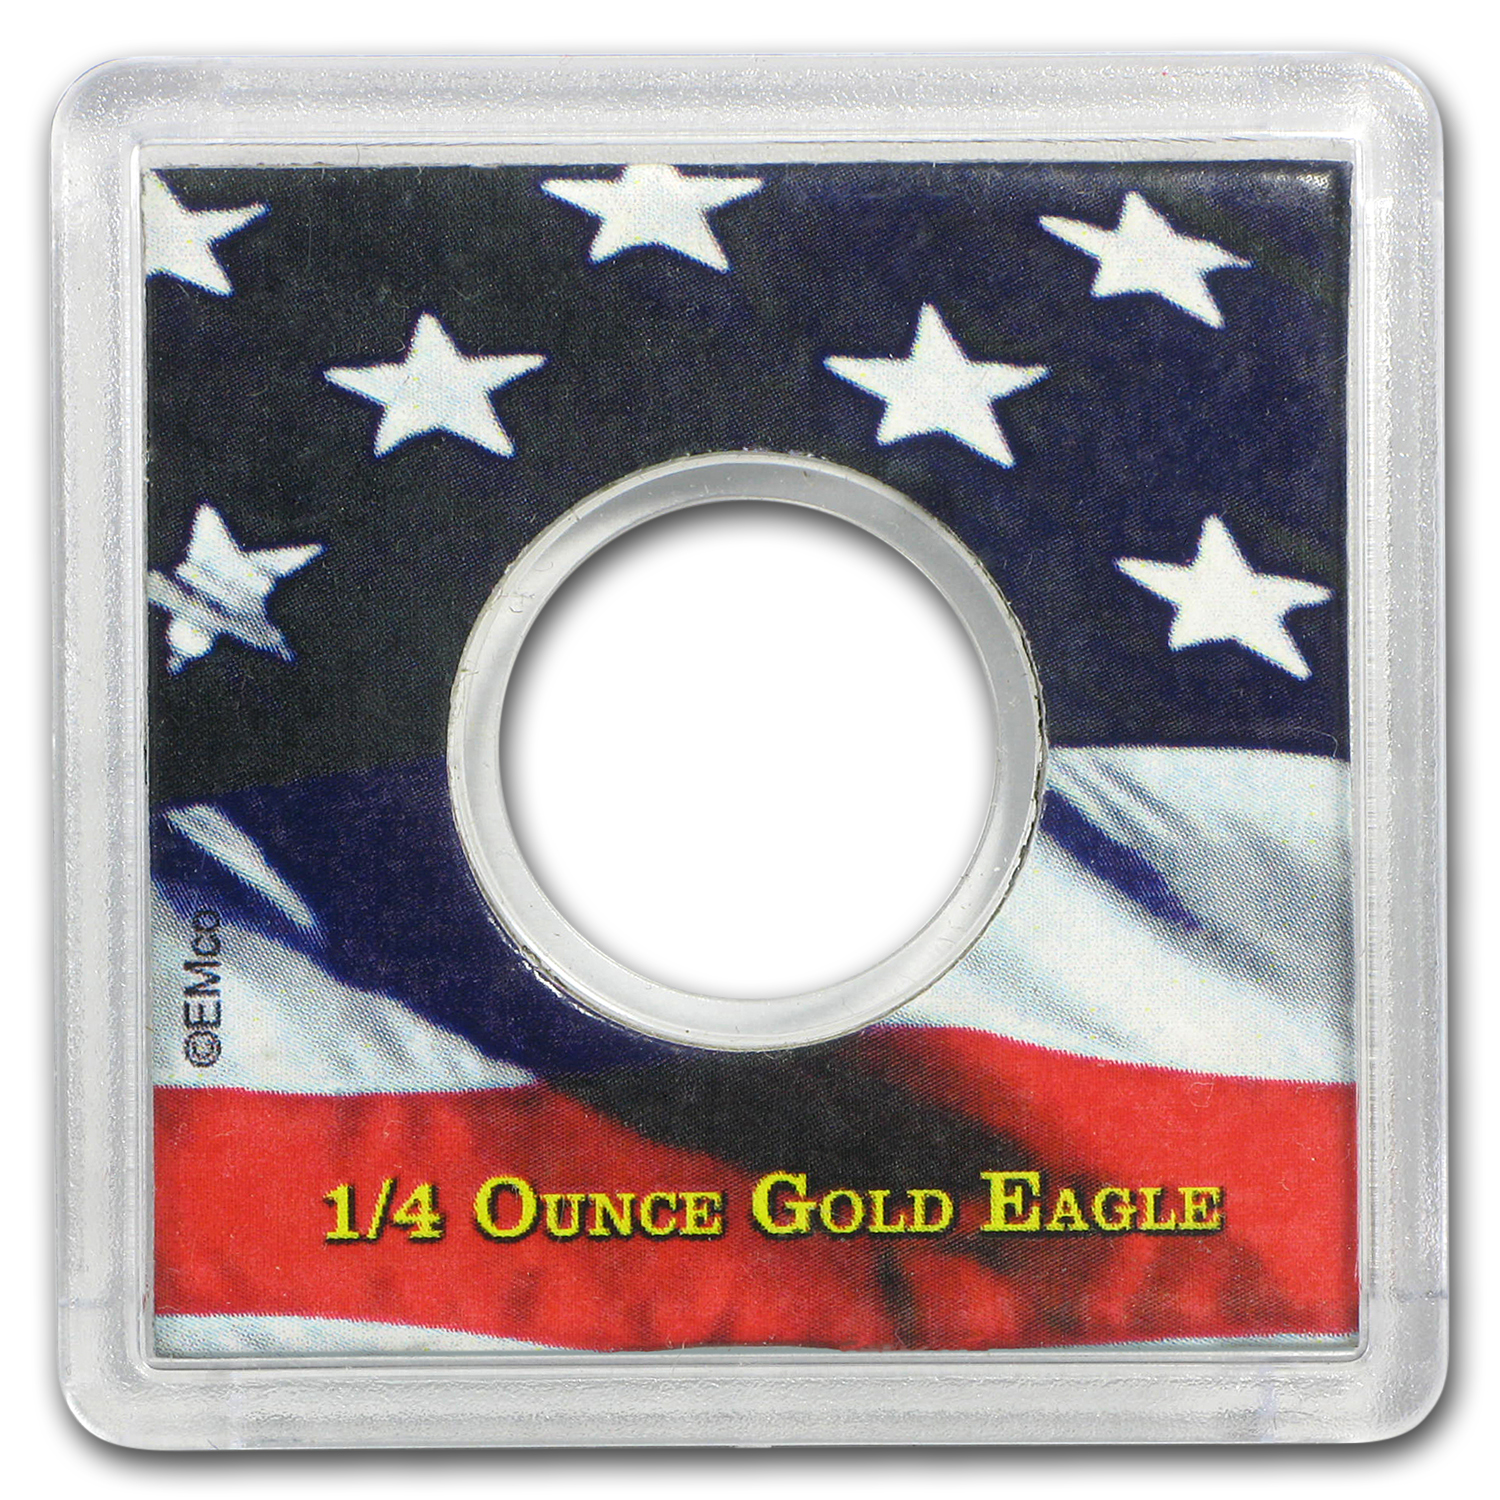 Buy American Gold Eagle Coin Display - 1/4 oz